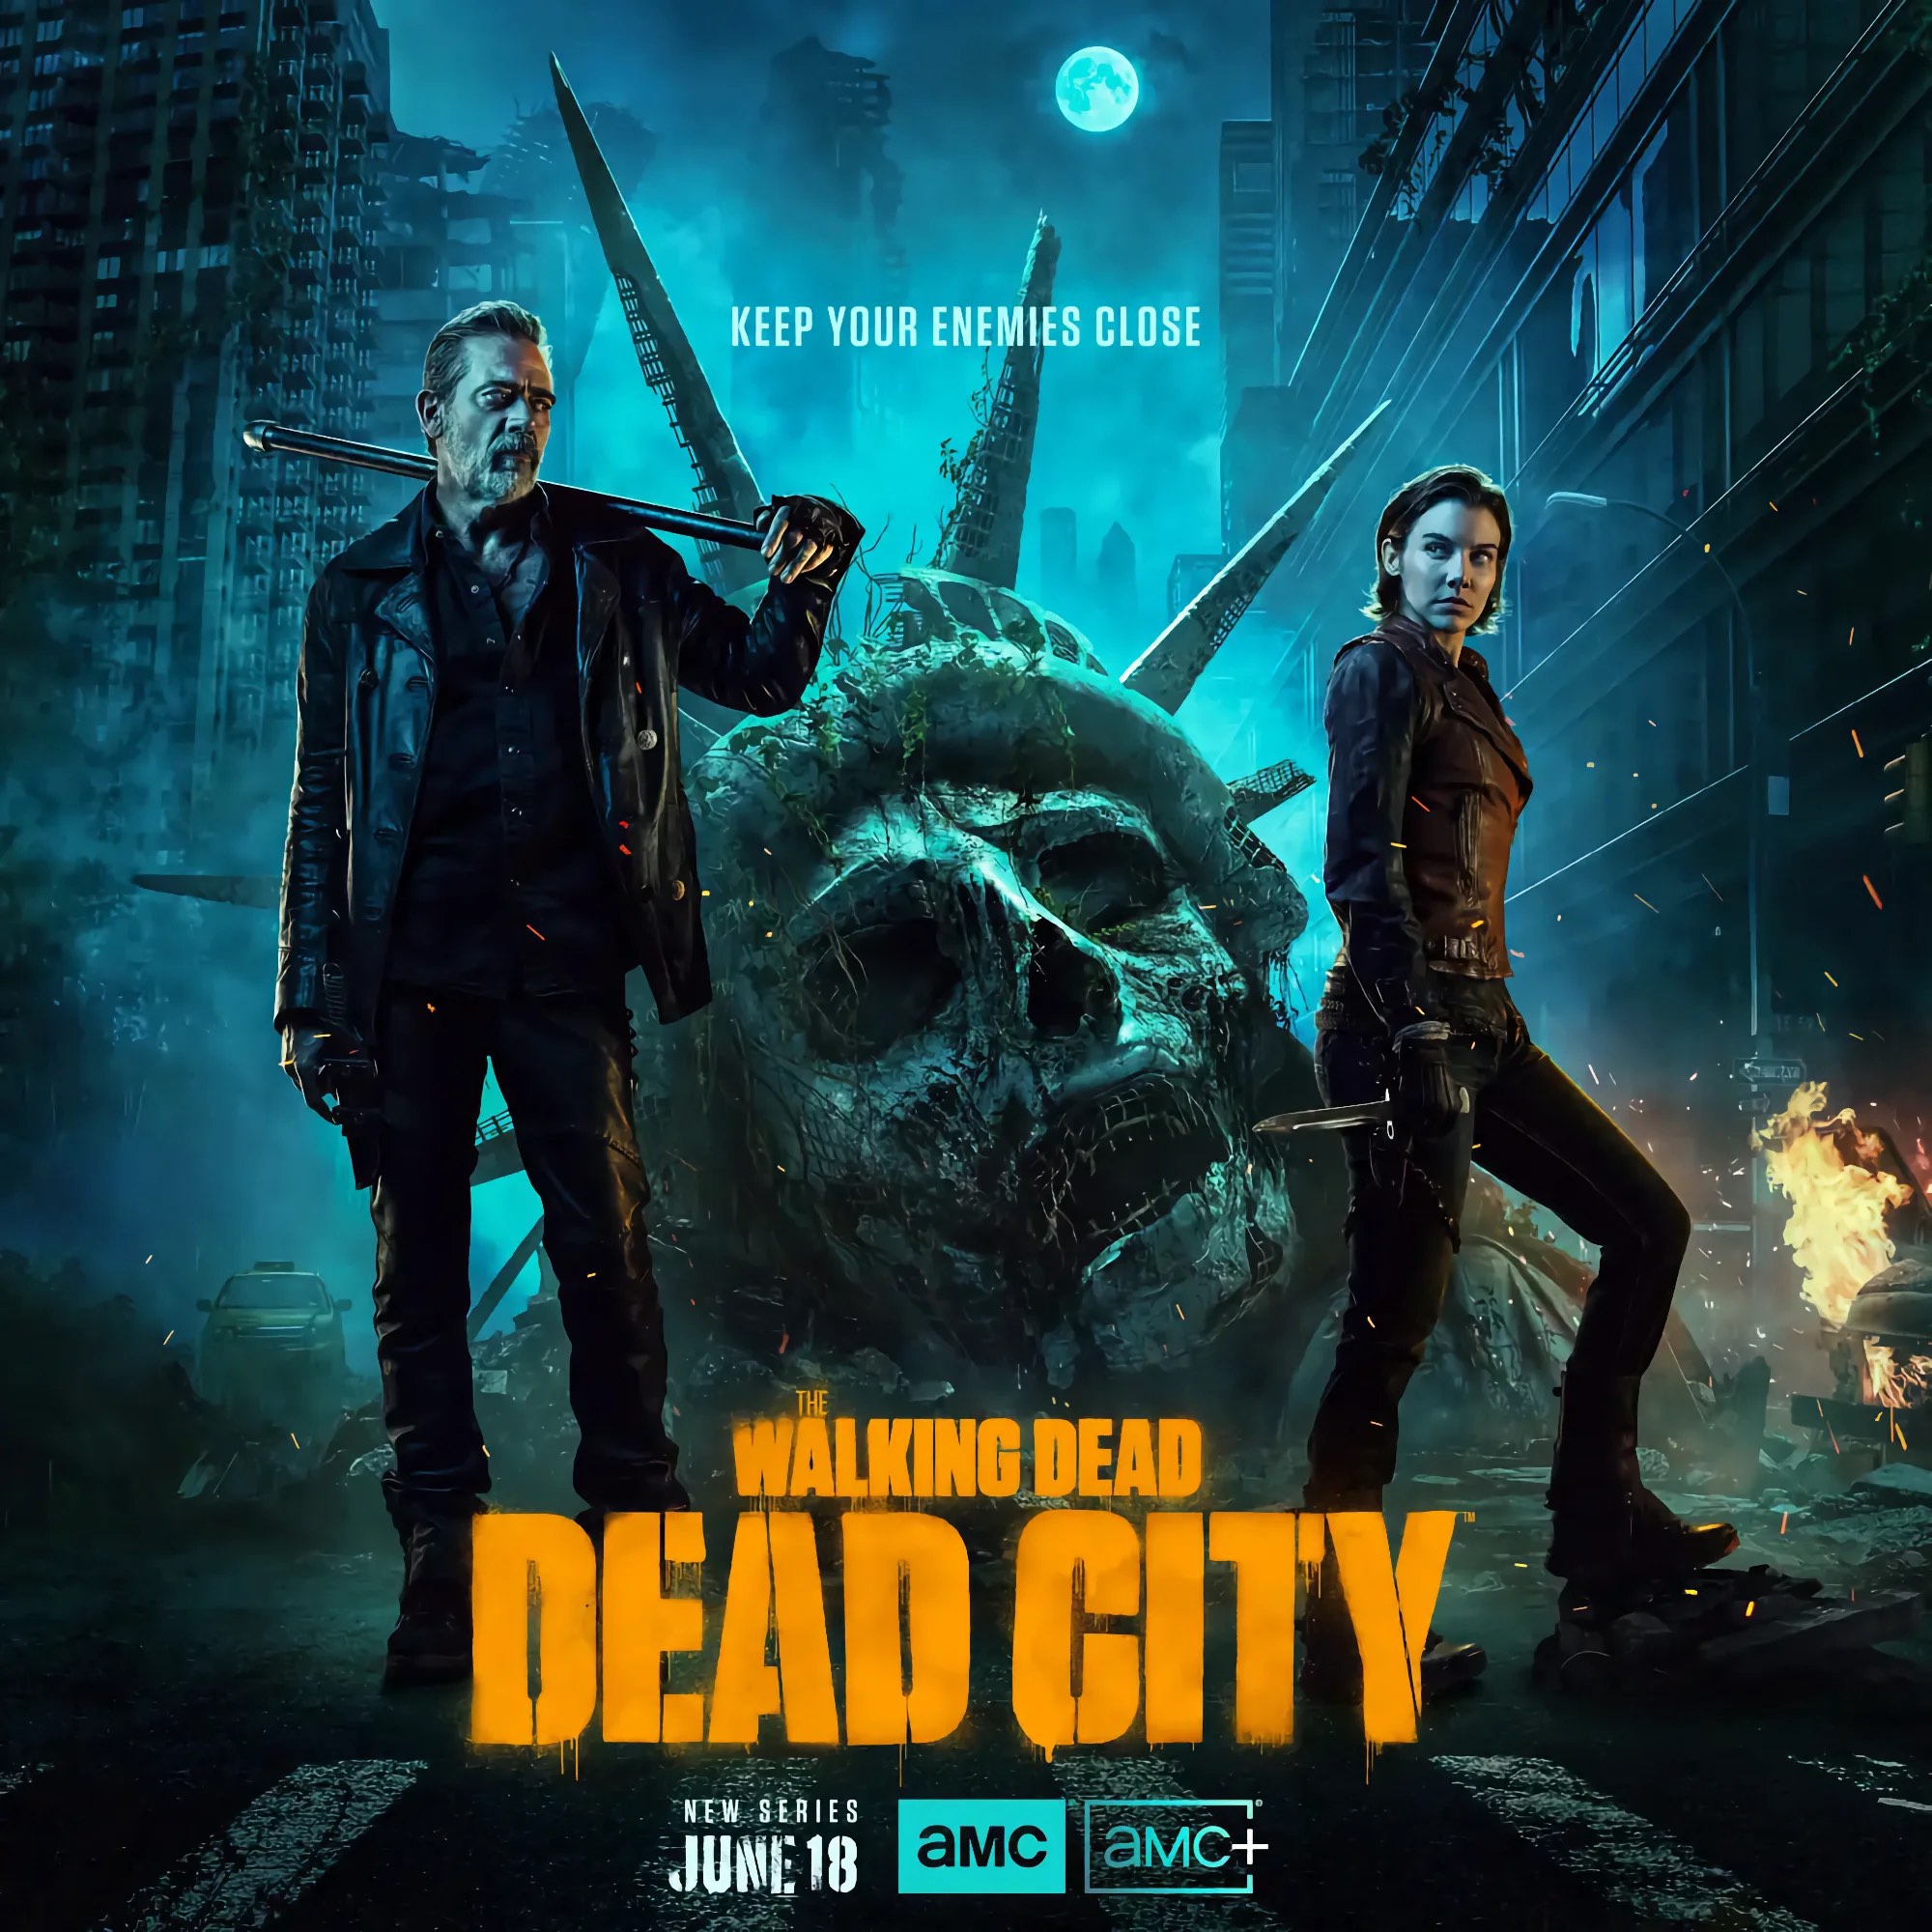 Trailer for The Walking Dead: Dead City.  Spinoff with Negan and Maggie from The Walking Dead.